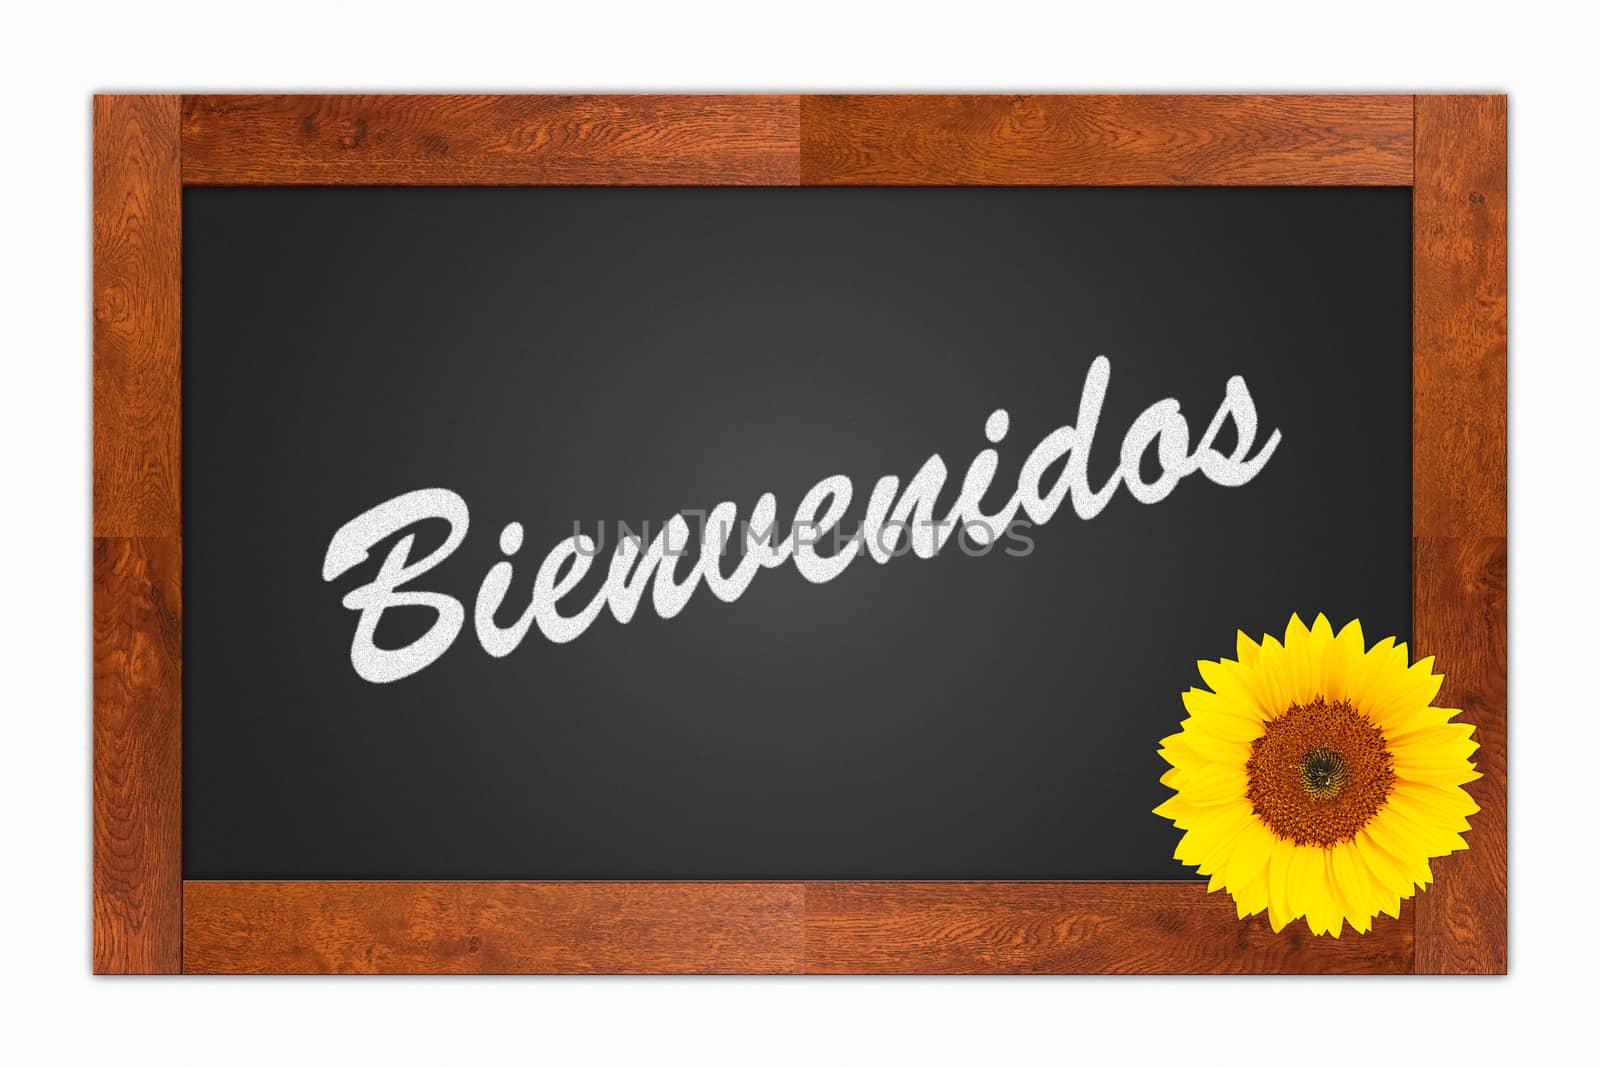 "Bienvenidos" (Welcome) written in chalk on a blank blackboard with sunflower on wooden frame, isolated on white background